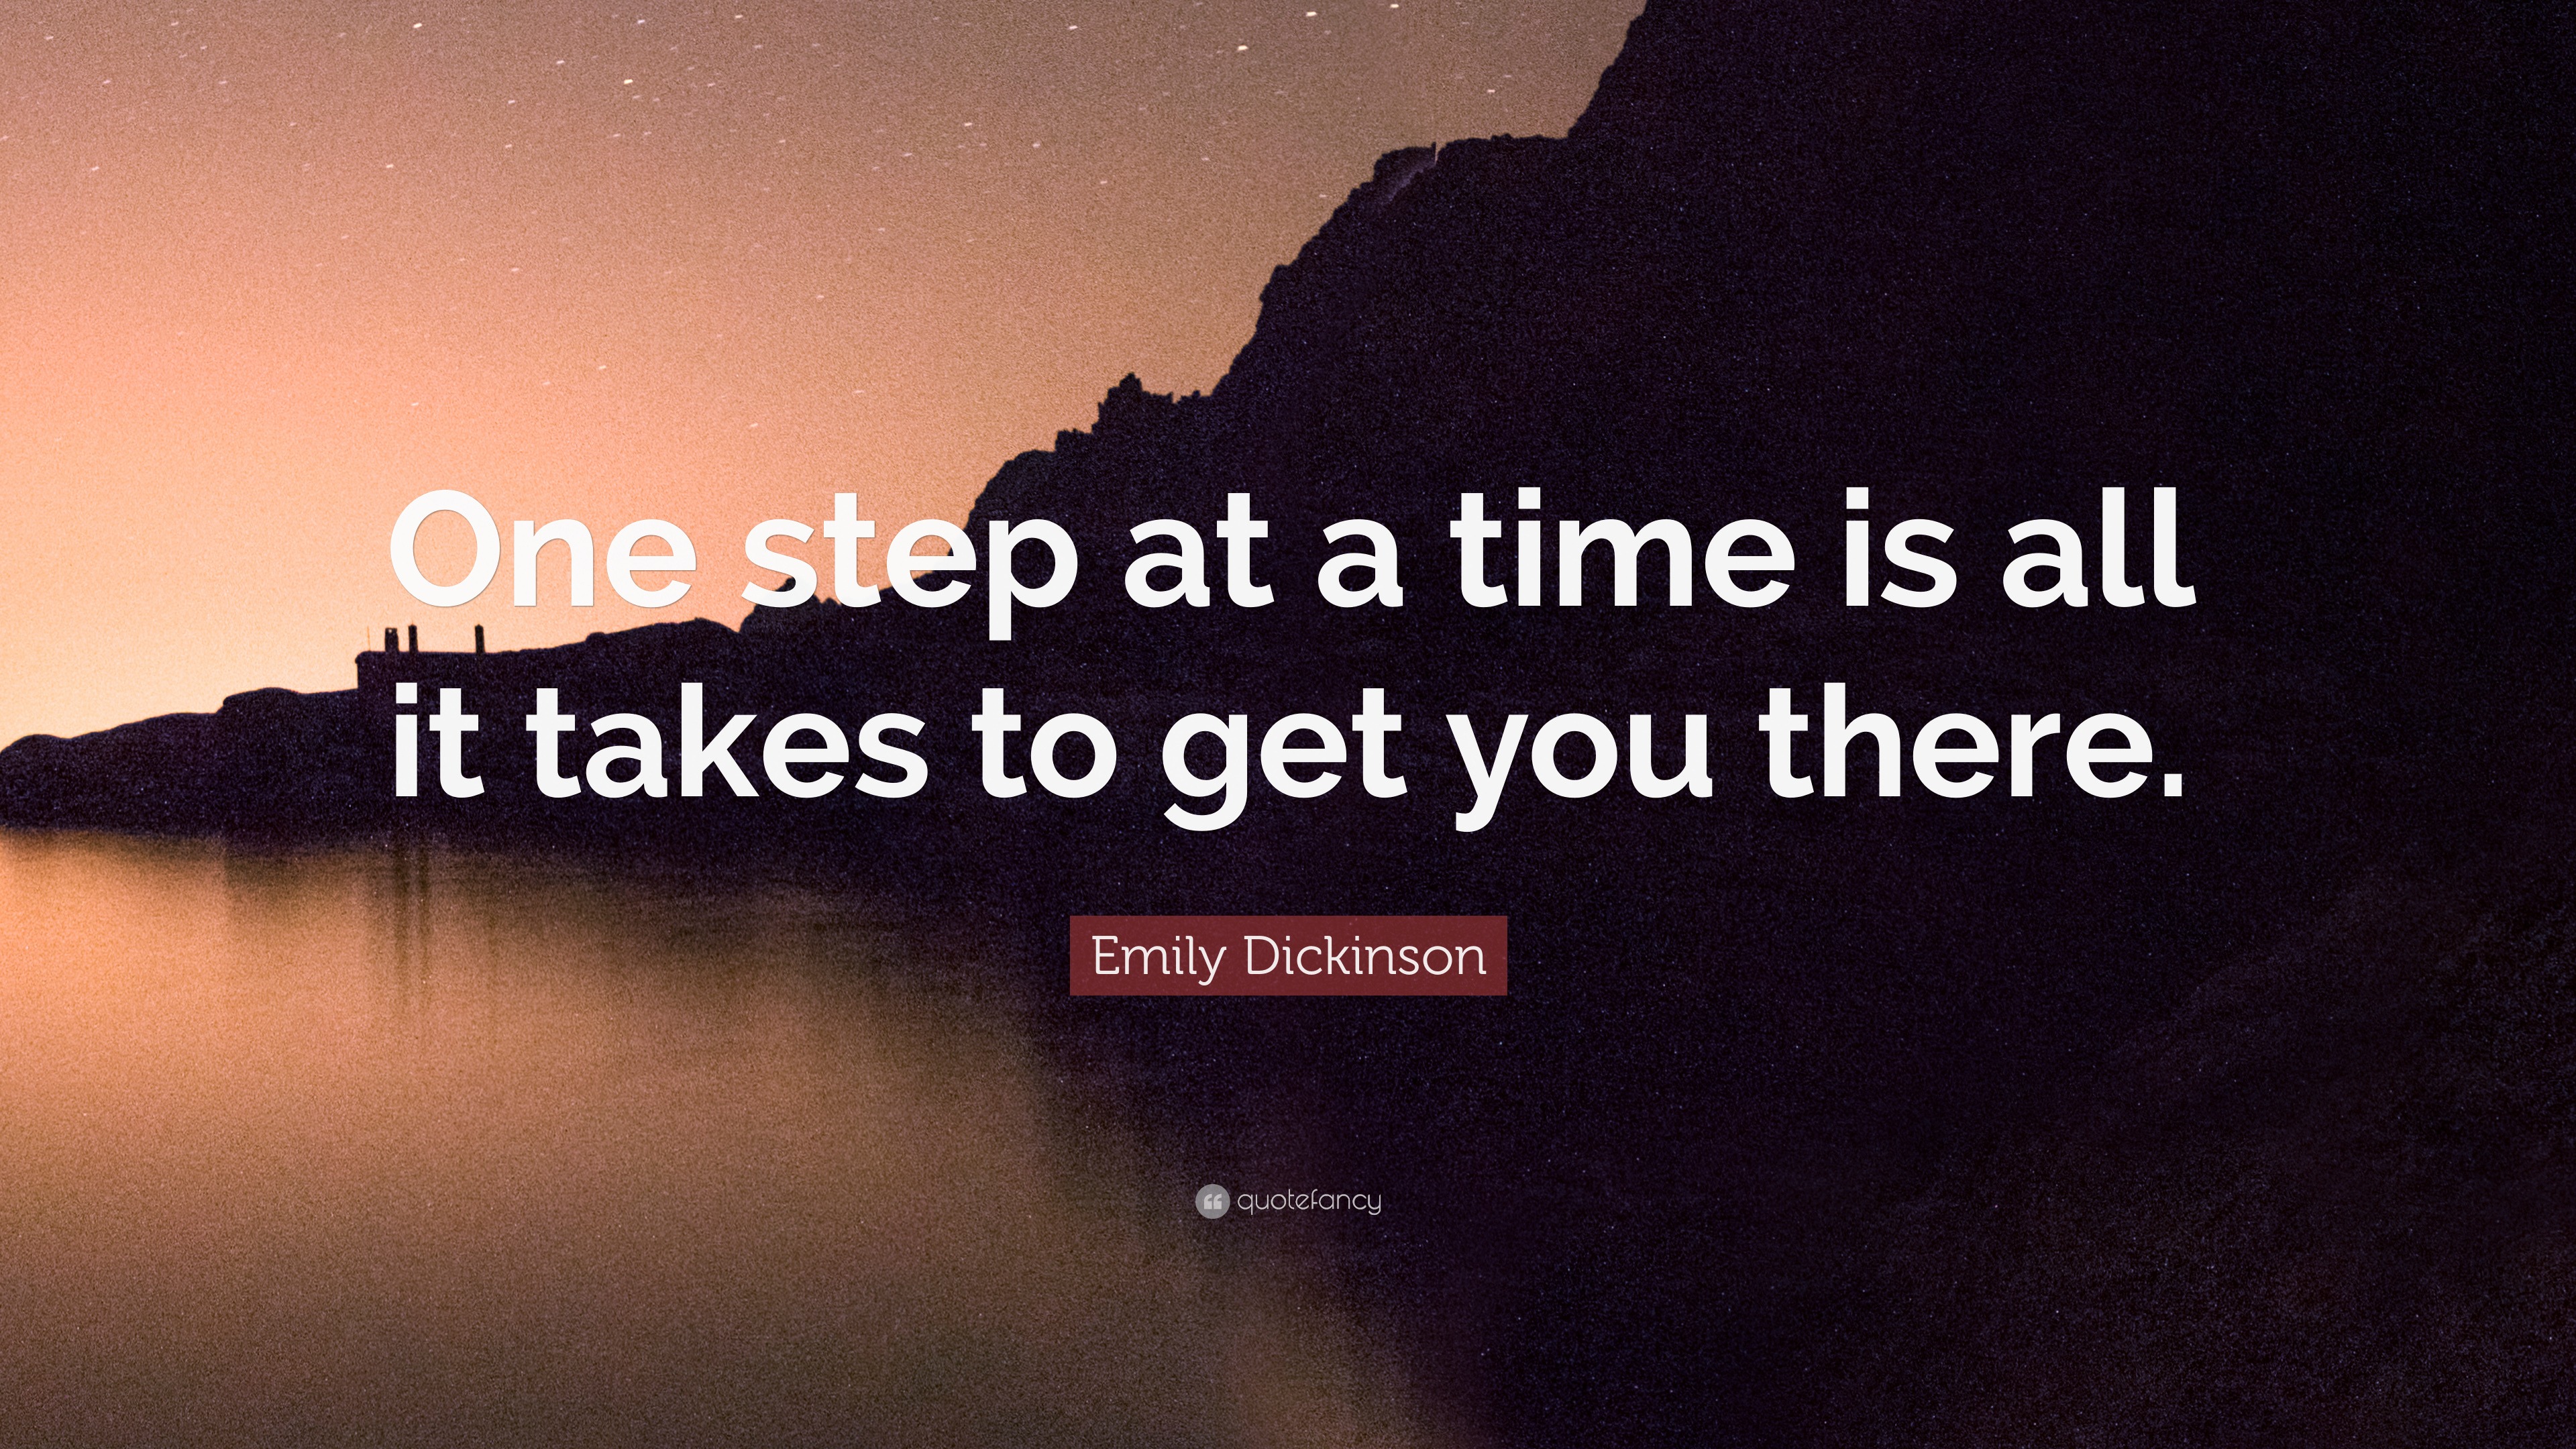 Emily Dickinson Quotes (100 wallpapers) - Quotefancy